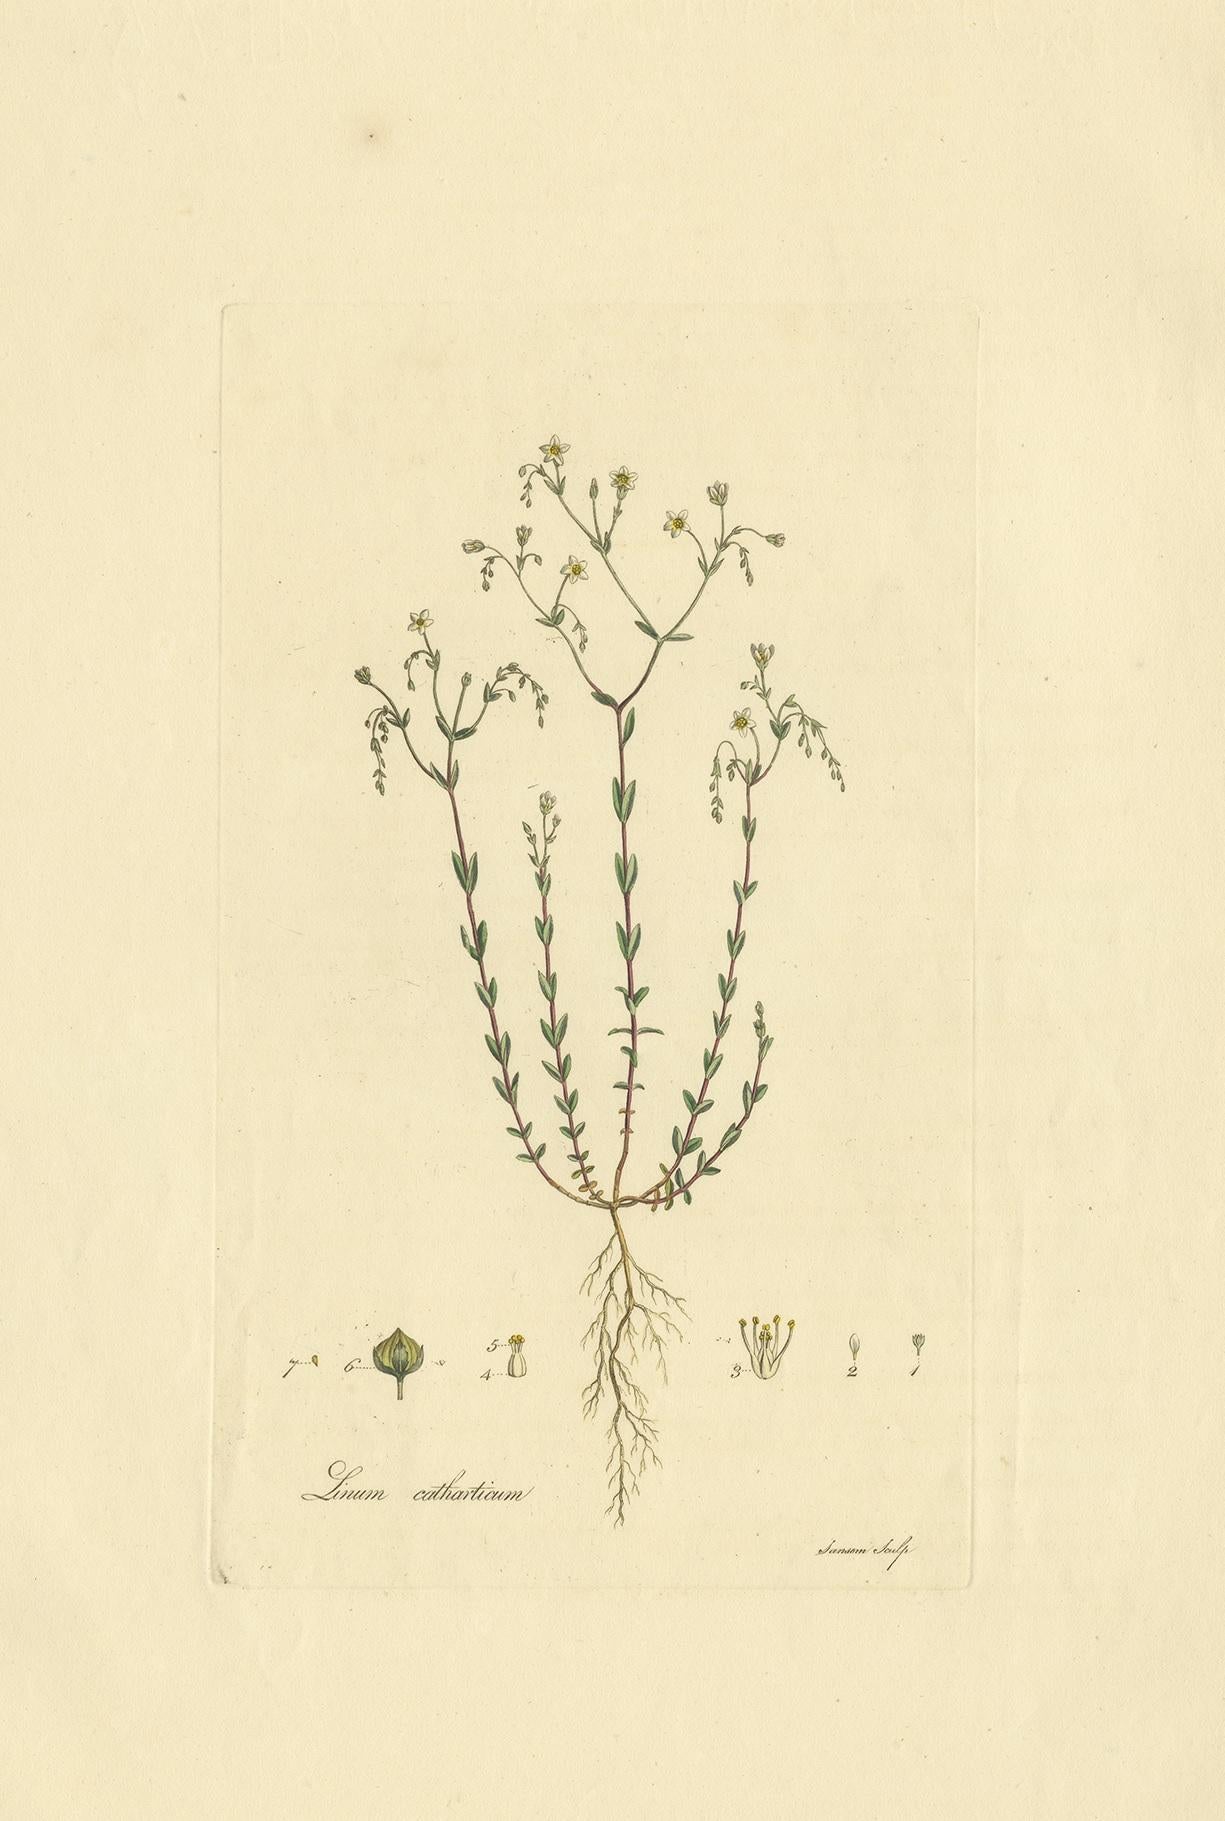 Antique botany print titled 'Linum Catharticum'. Hand colored engraving of Linum Catharticum, also known as purging flax, or fairy flax. This print originates from 'Flora Londinensis' by William Curtis.